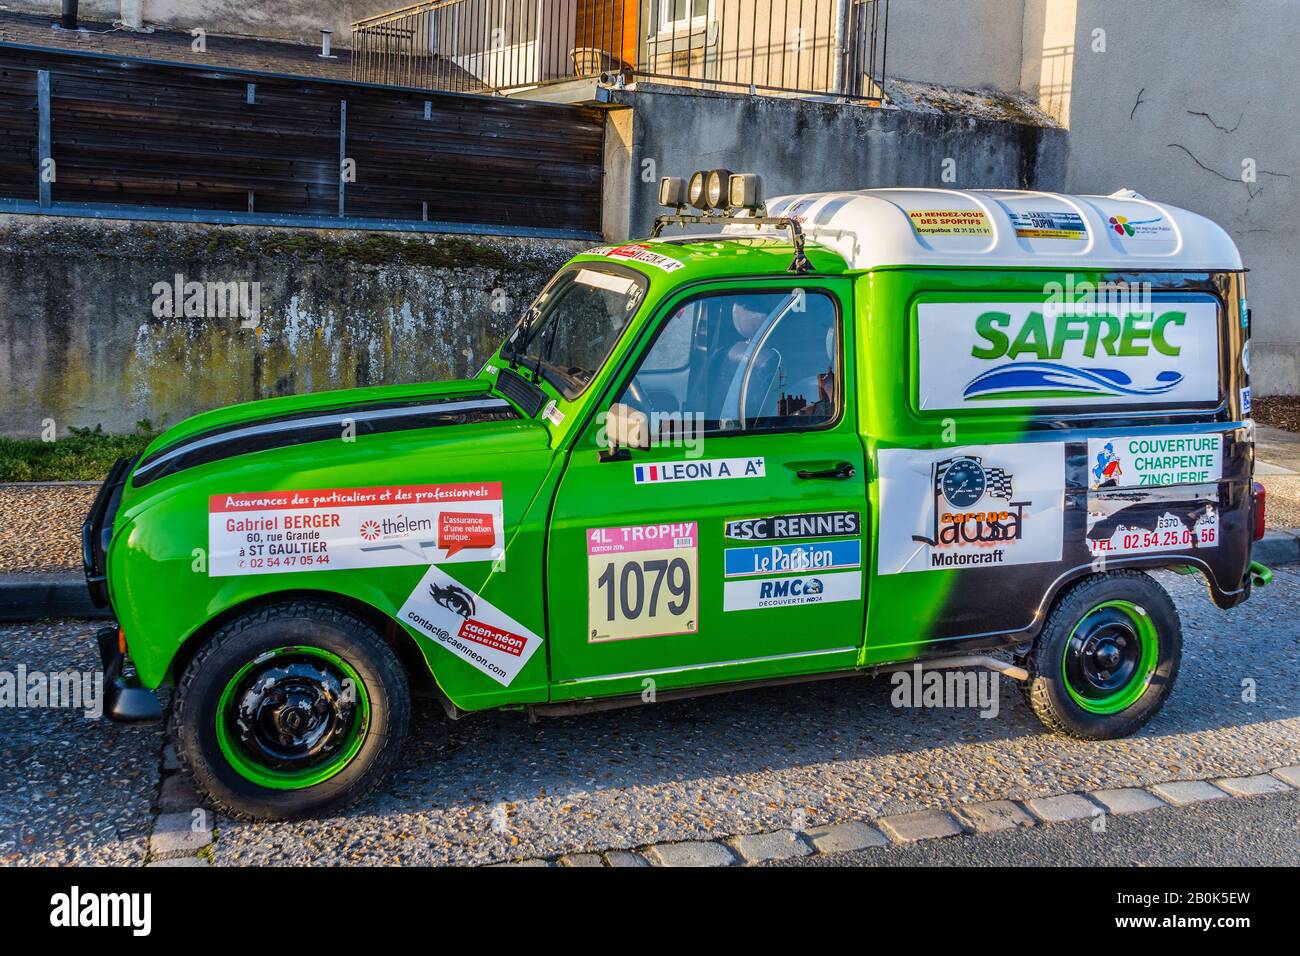 Colourful Renault 4L camionette (small van) for rallying with sponsored advertising - Argenton-sur-Creuse, Indre, France. Stock Photo